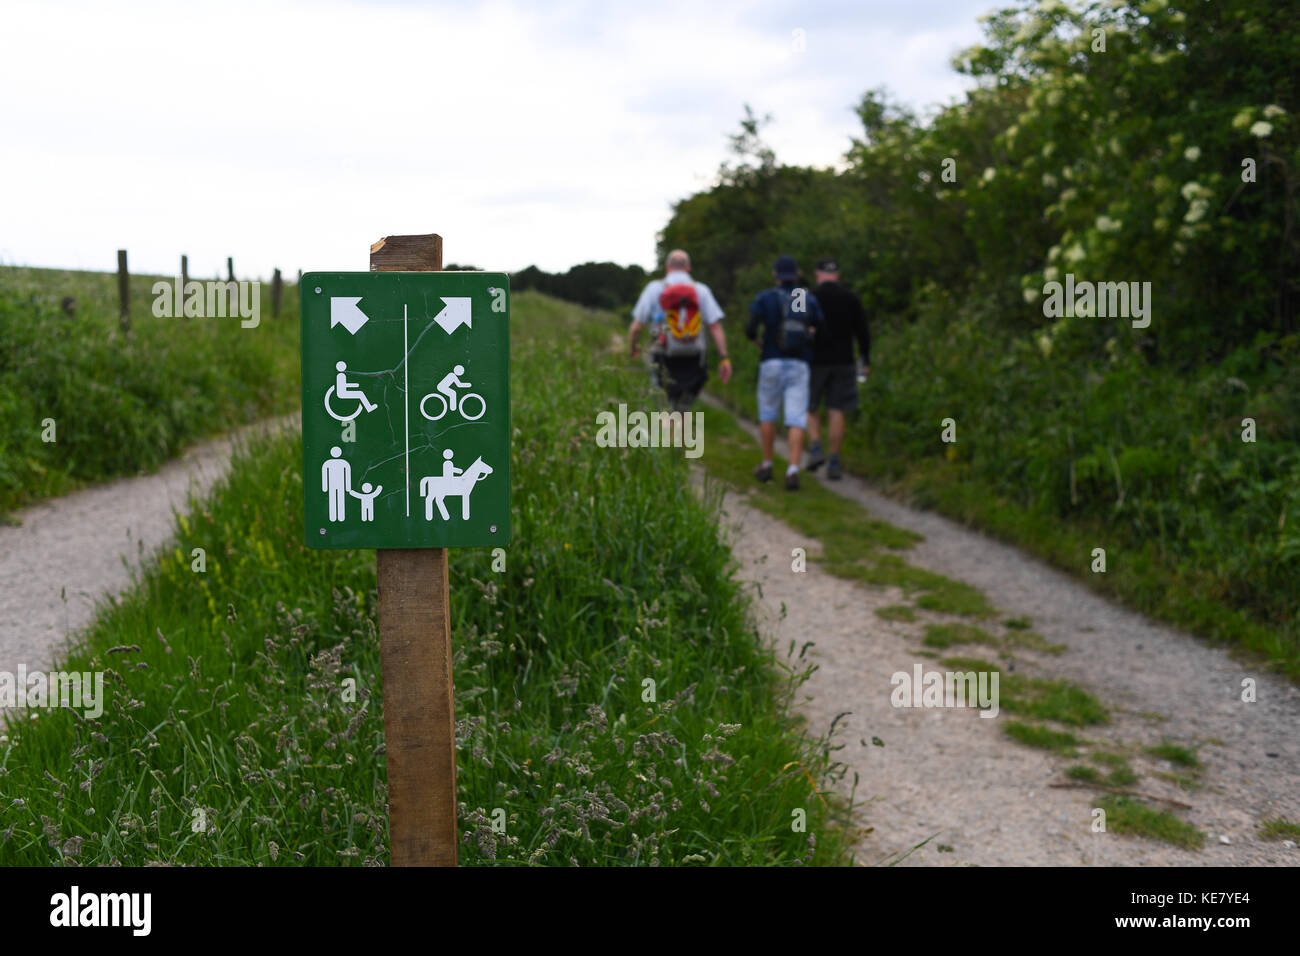 Ramblers walking on the South Downs way from Winchester to Eastbourne next to a  sign showing access rights for paths and trails for multiple users. Stock Photo